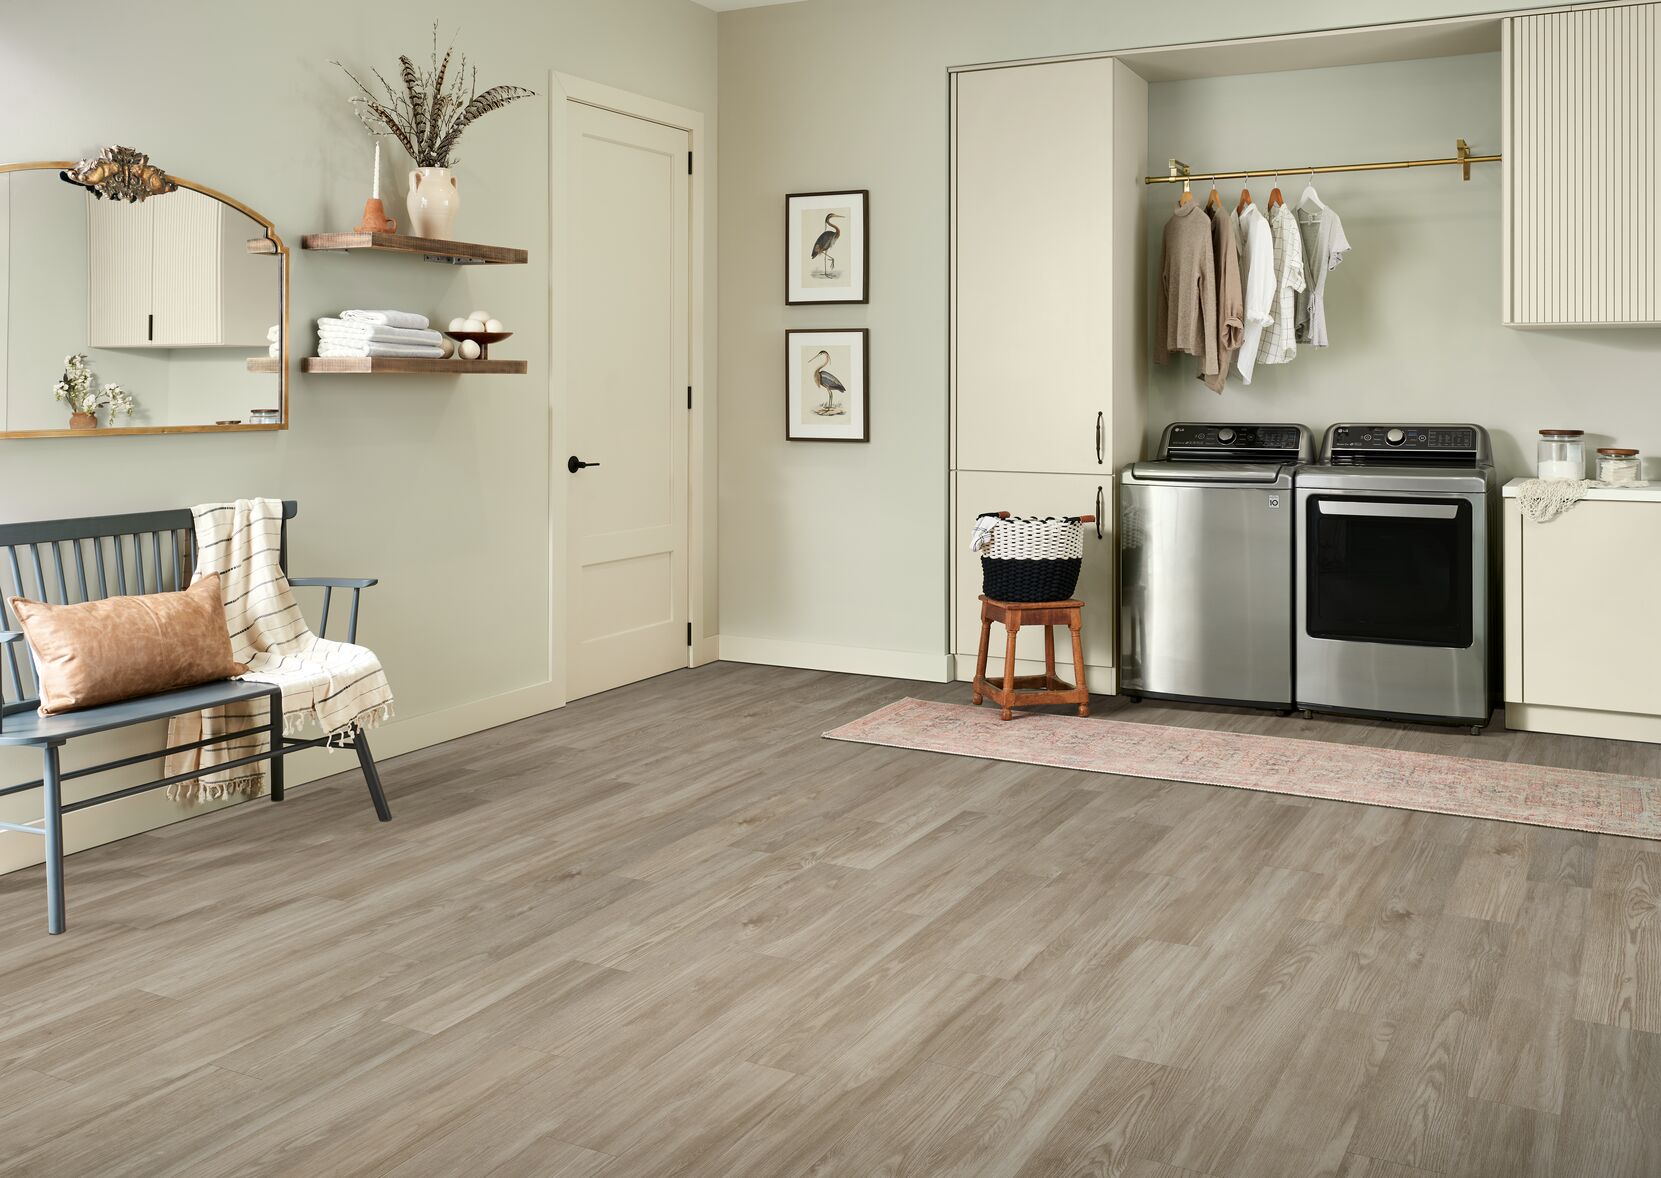 Armstrong Flooring - American Personality Pro Homespun Impression Antique Beige